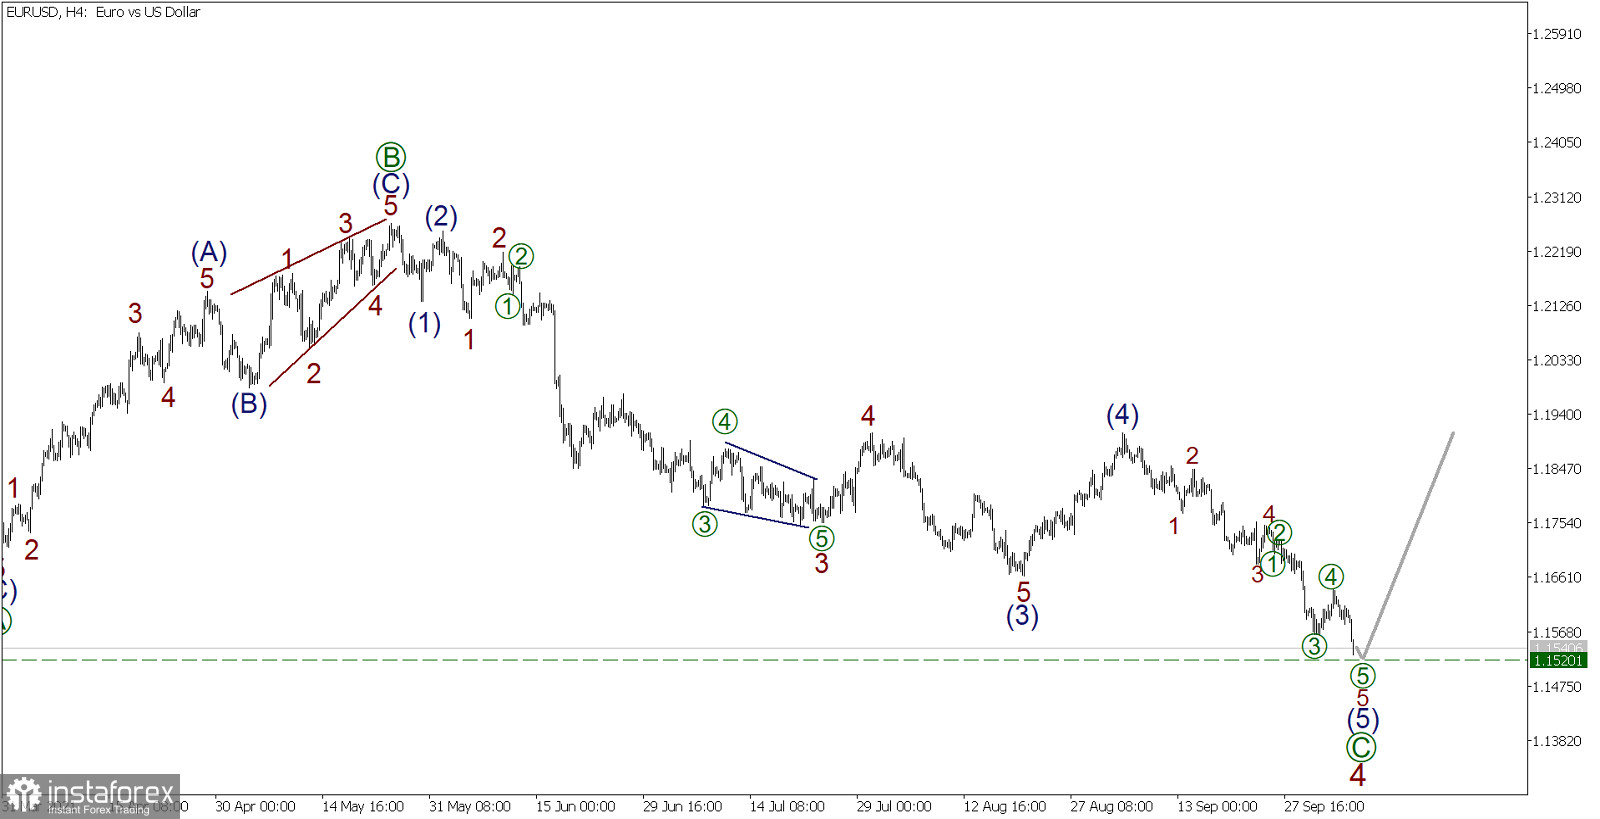 Outlook for EUR/USD on October 6. EUR/USD to leave sideways channel.